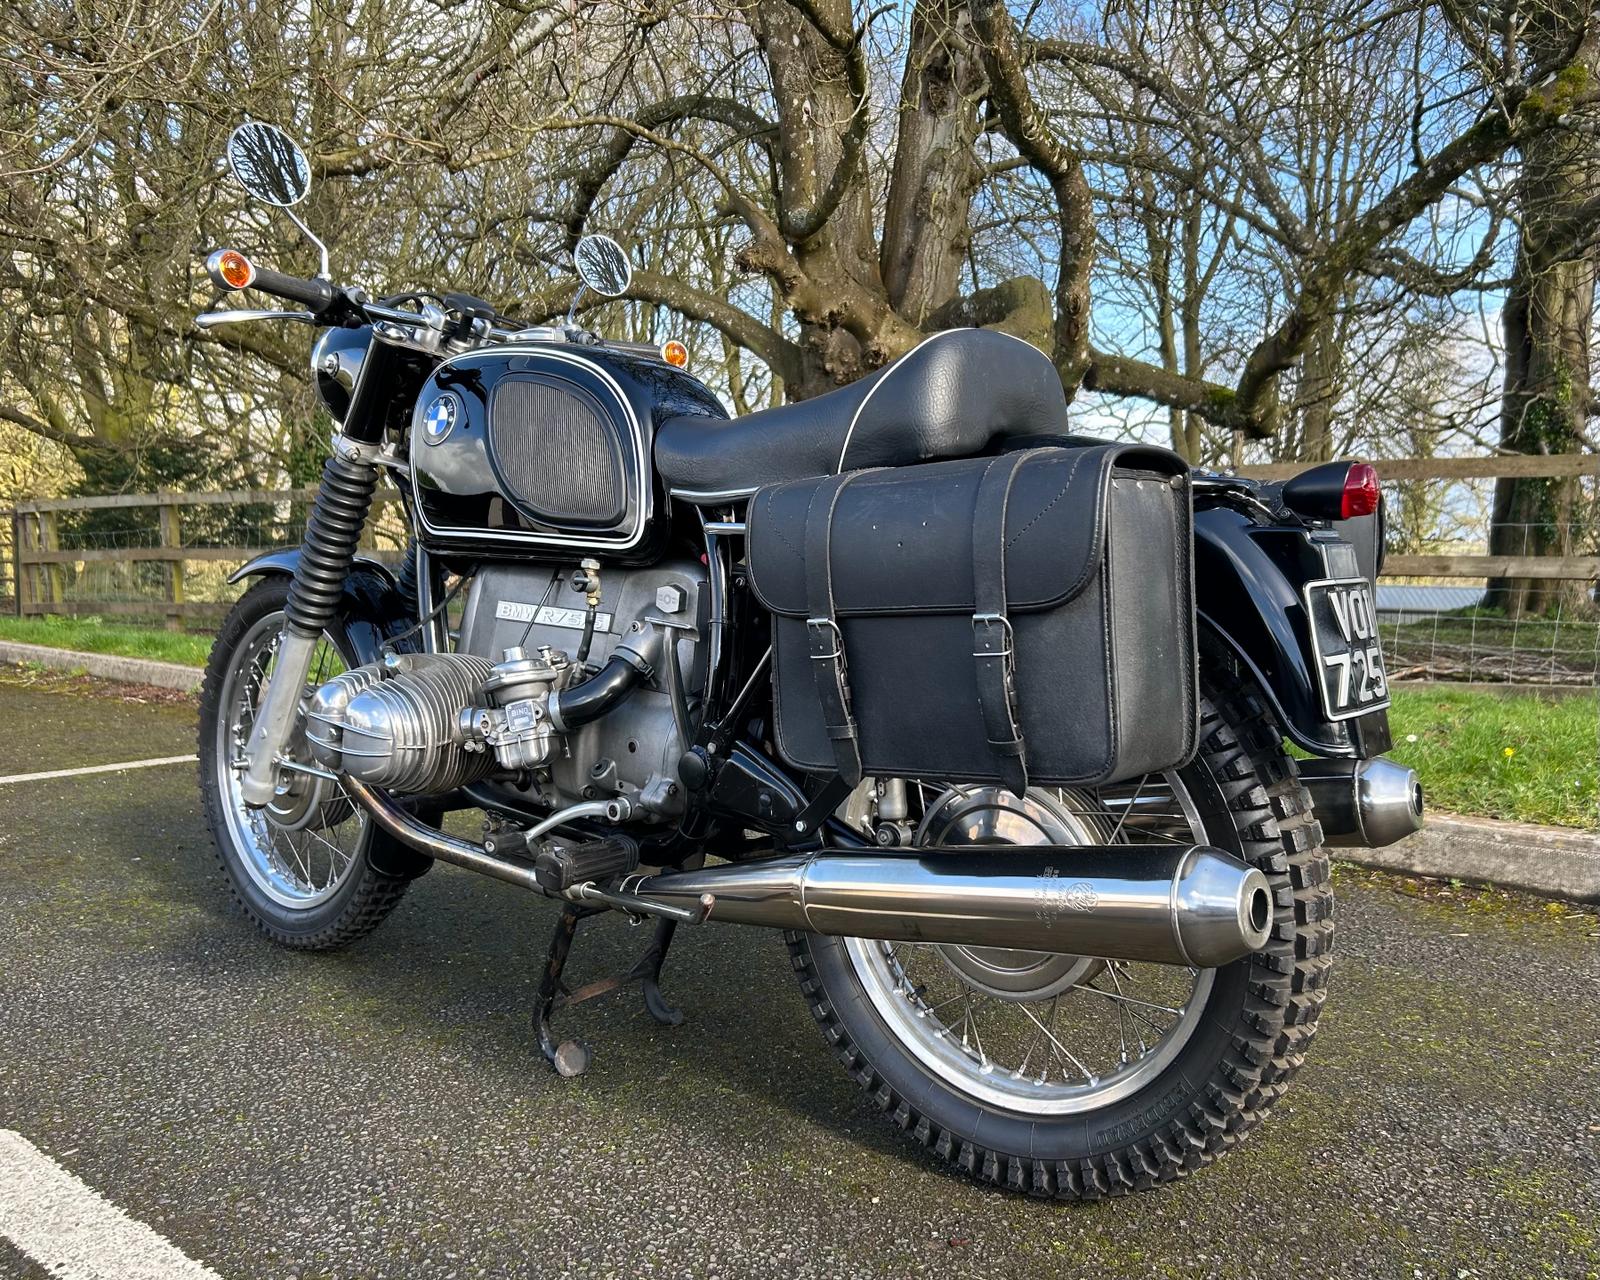 A BMW R75/5 MOTORCYCLE .1971. 72452 MILES. EXCELLENT WELL RESTORED CONDITION, V5, MOT AND TAX - Image 10 of 17